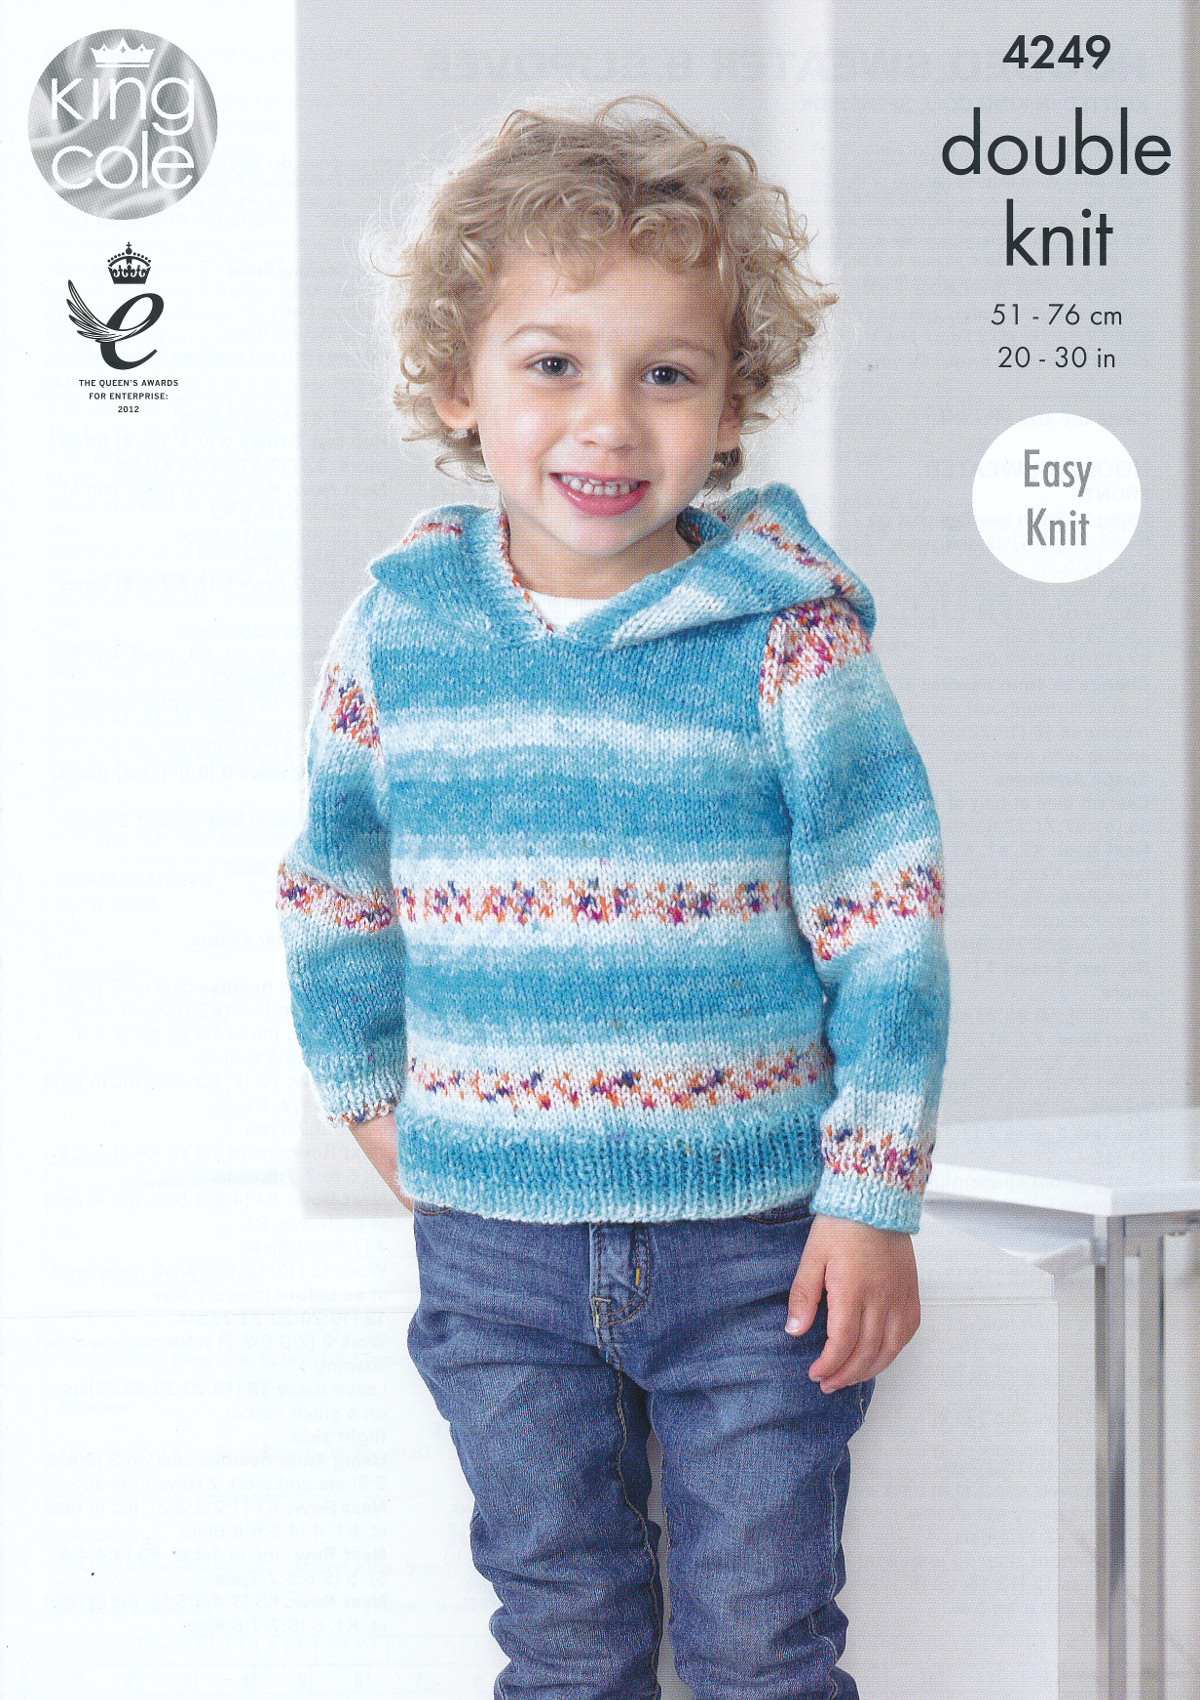 Boy Knitting Patterns Details About King Cole Dk Double Knitting Pattern Childrens Boys Hooded Sweater Slipover 4249